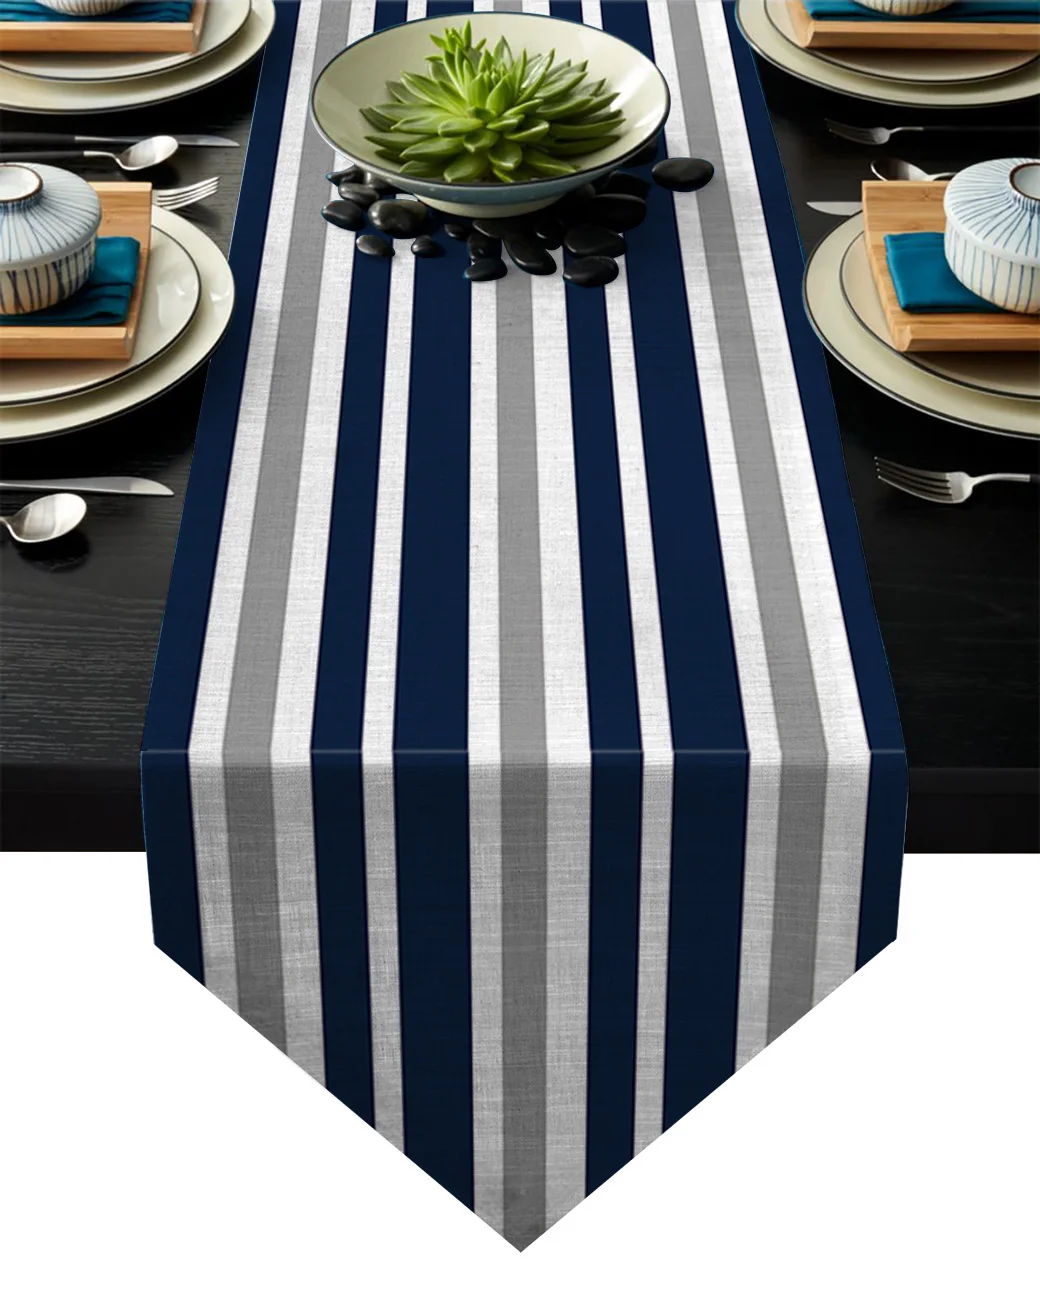 Striped Blue White Gray Table Runner Kitchen Decor Table Flag Tablecloth Placemat Hotel Home Festival Decoration Table Runners